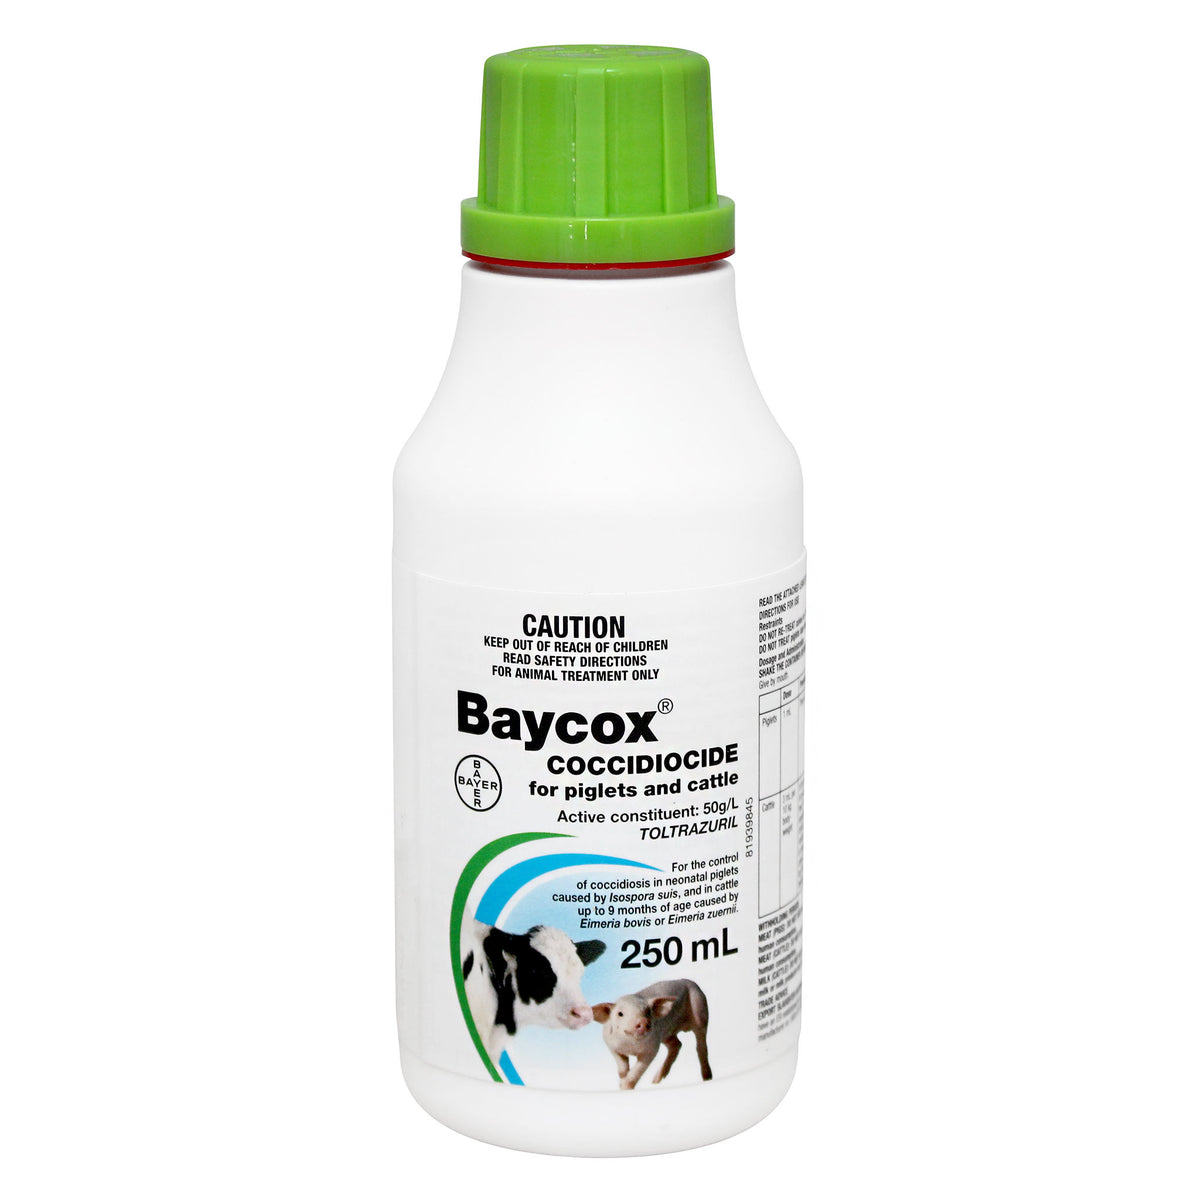 Baycox Piglet &amp; Cattle Coccidiocide 250mL